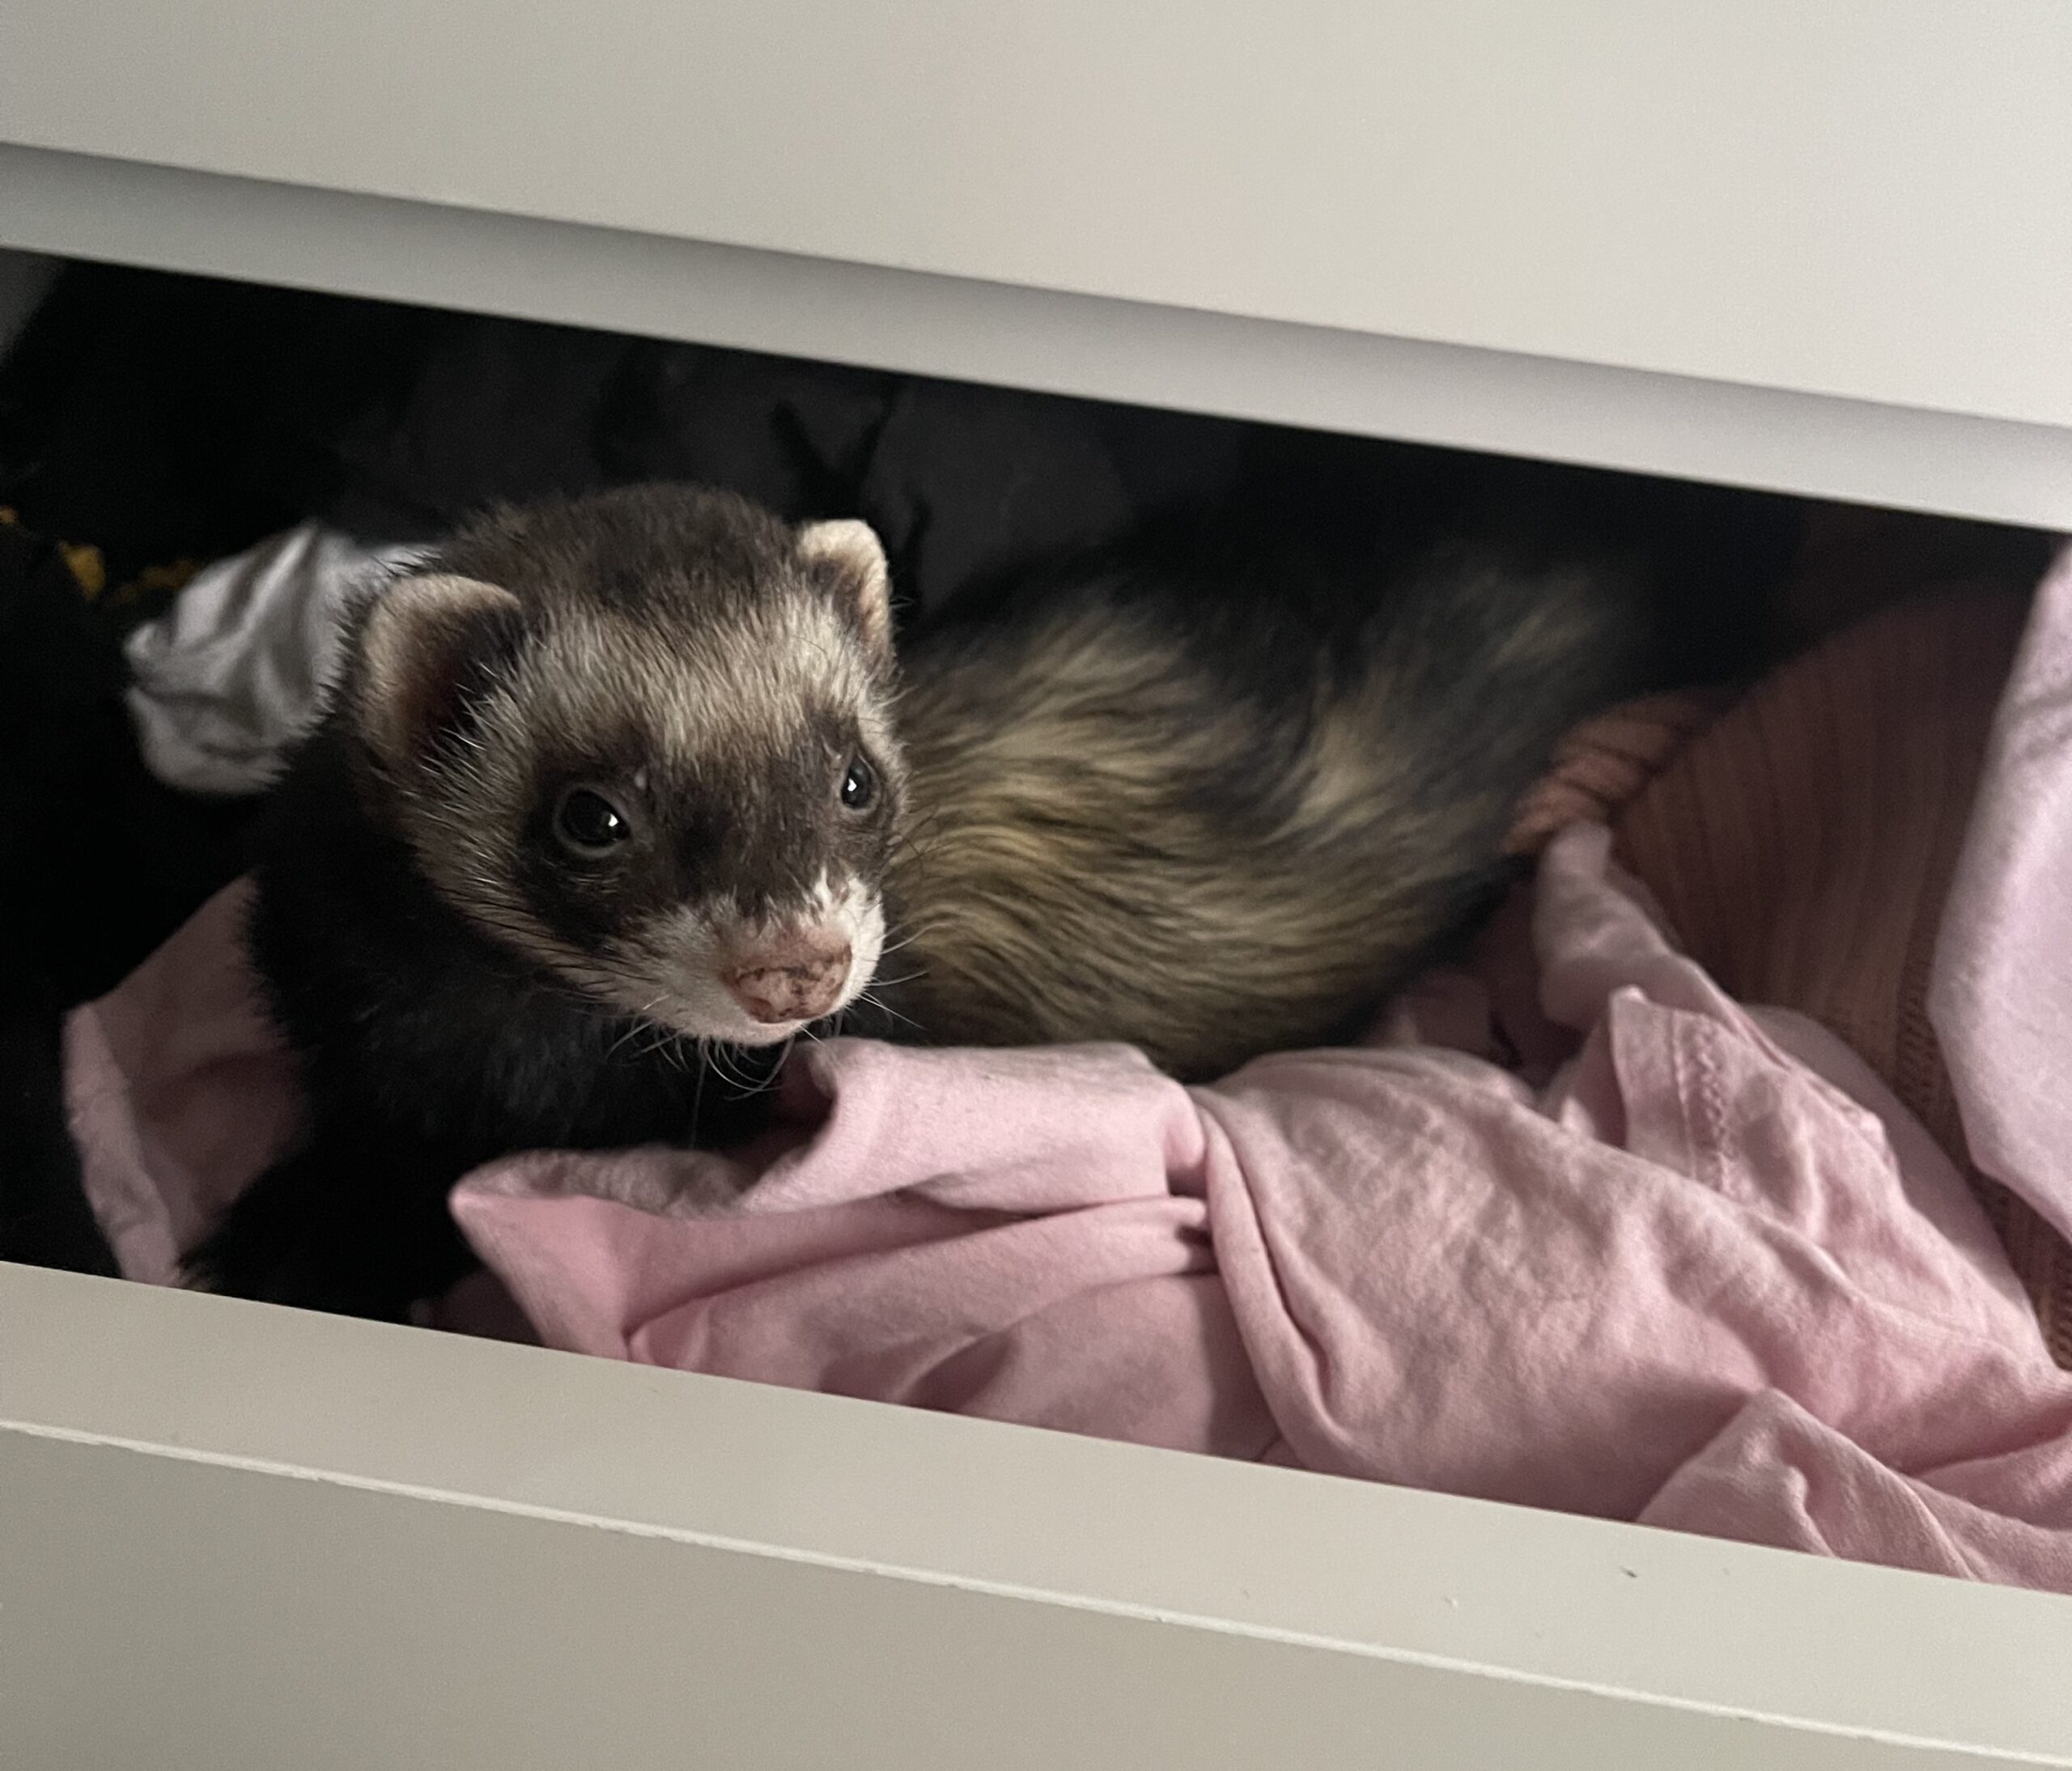 A black and white ferret looks up at the camera from the drawer of a dresser